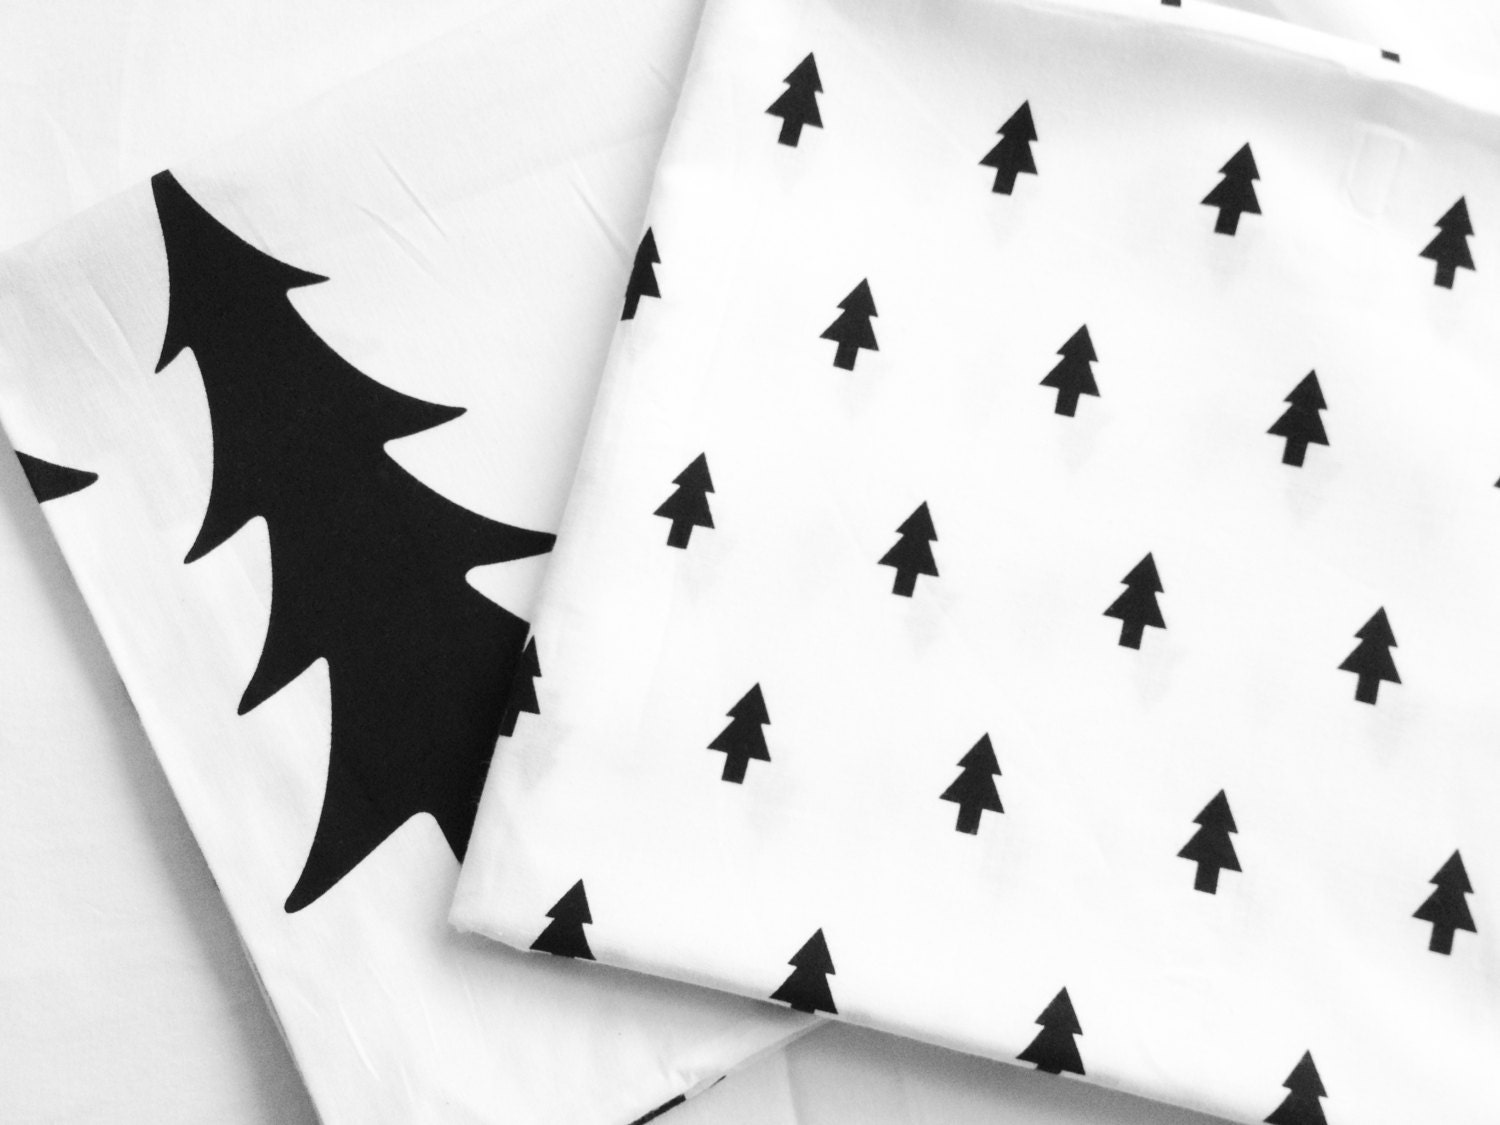 Simple Black and White Patterns Black Trees Cotton Fabric - Small Trees or Big Trees - Northern Europe Style - Christmas Fabric By the Yard - landofoh